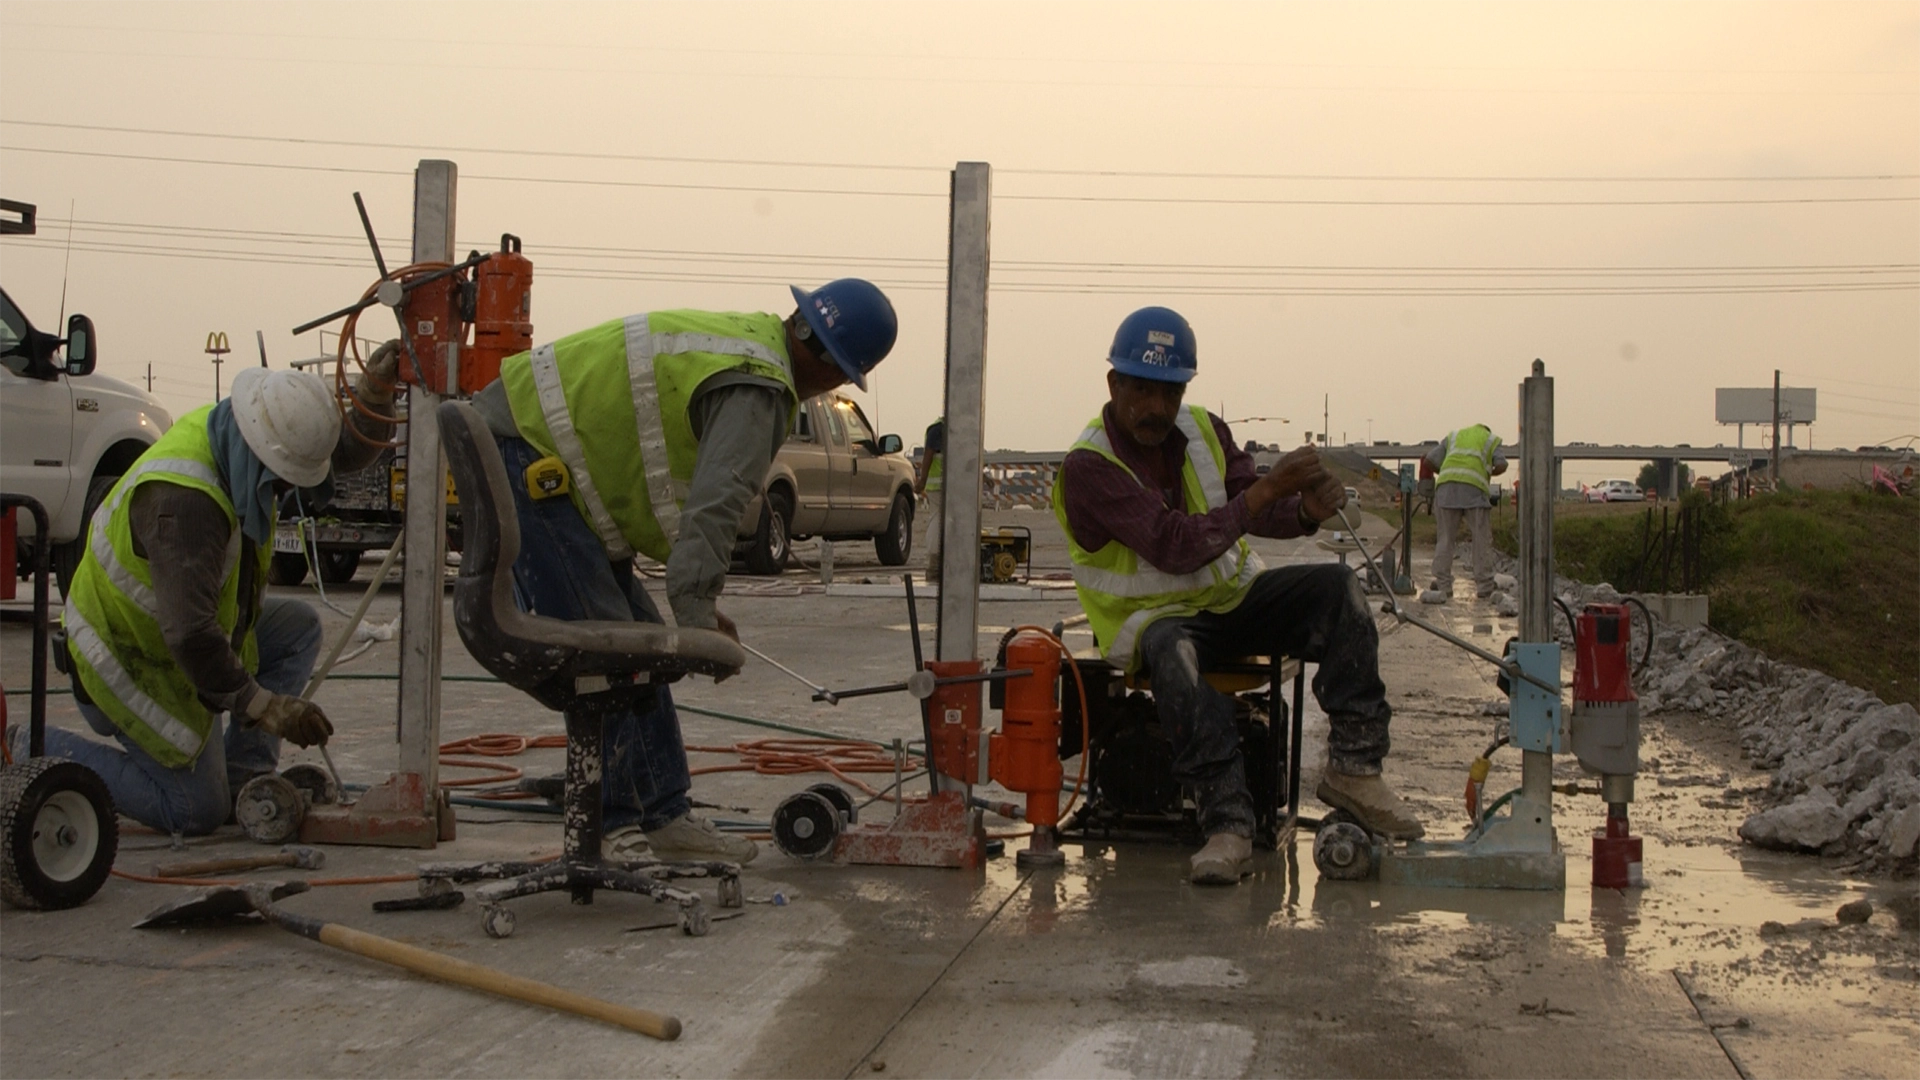 Workers drilling cores in concrete